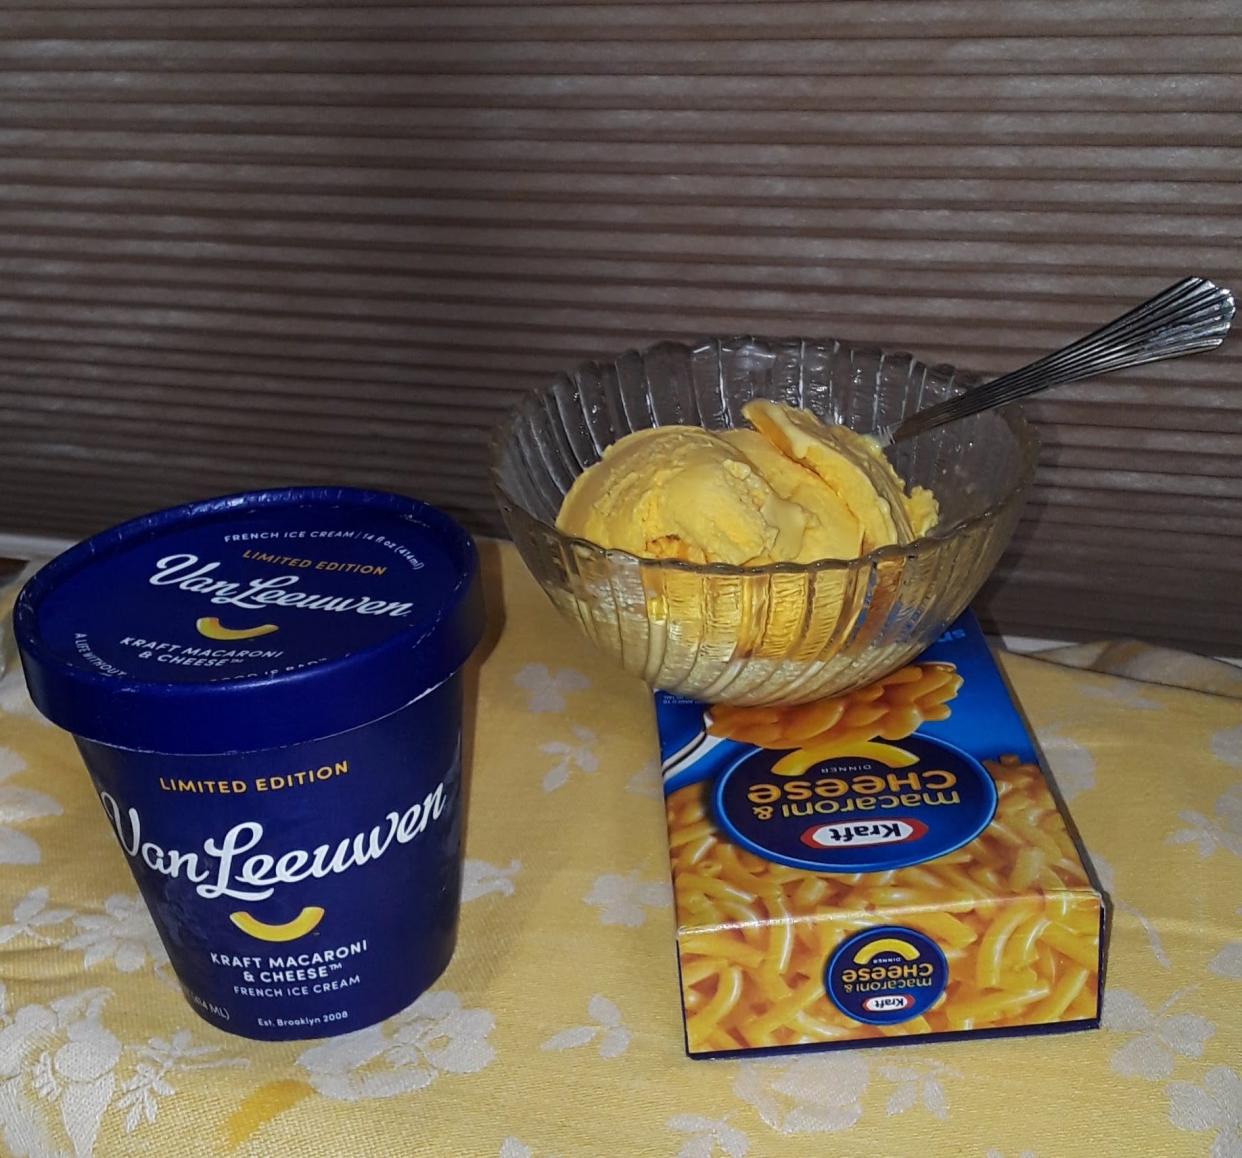 Our taste test panel agreed the texture of Van Leeuwen's Kraft Macaroni and Cheese ice cream is amazingly creamy, smooth and worth savoring.